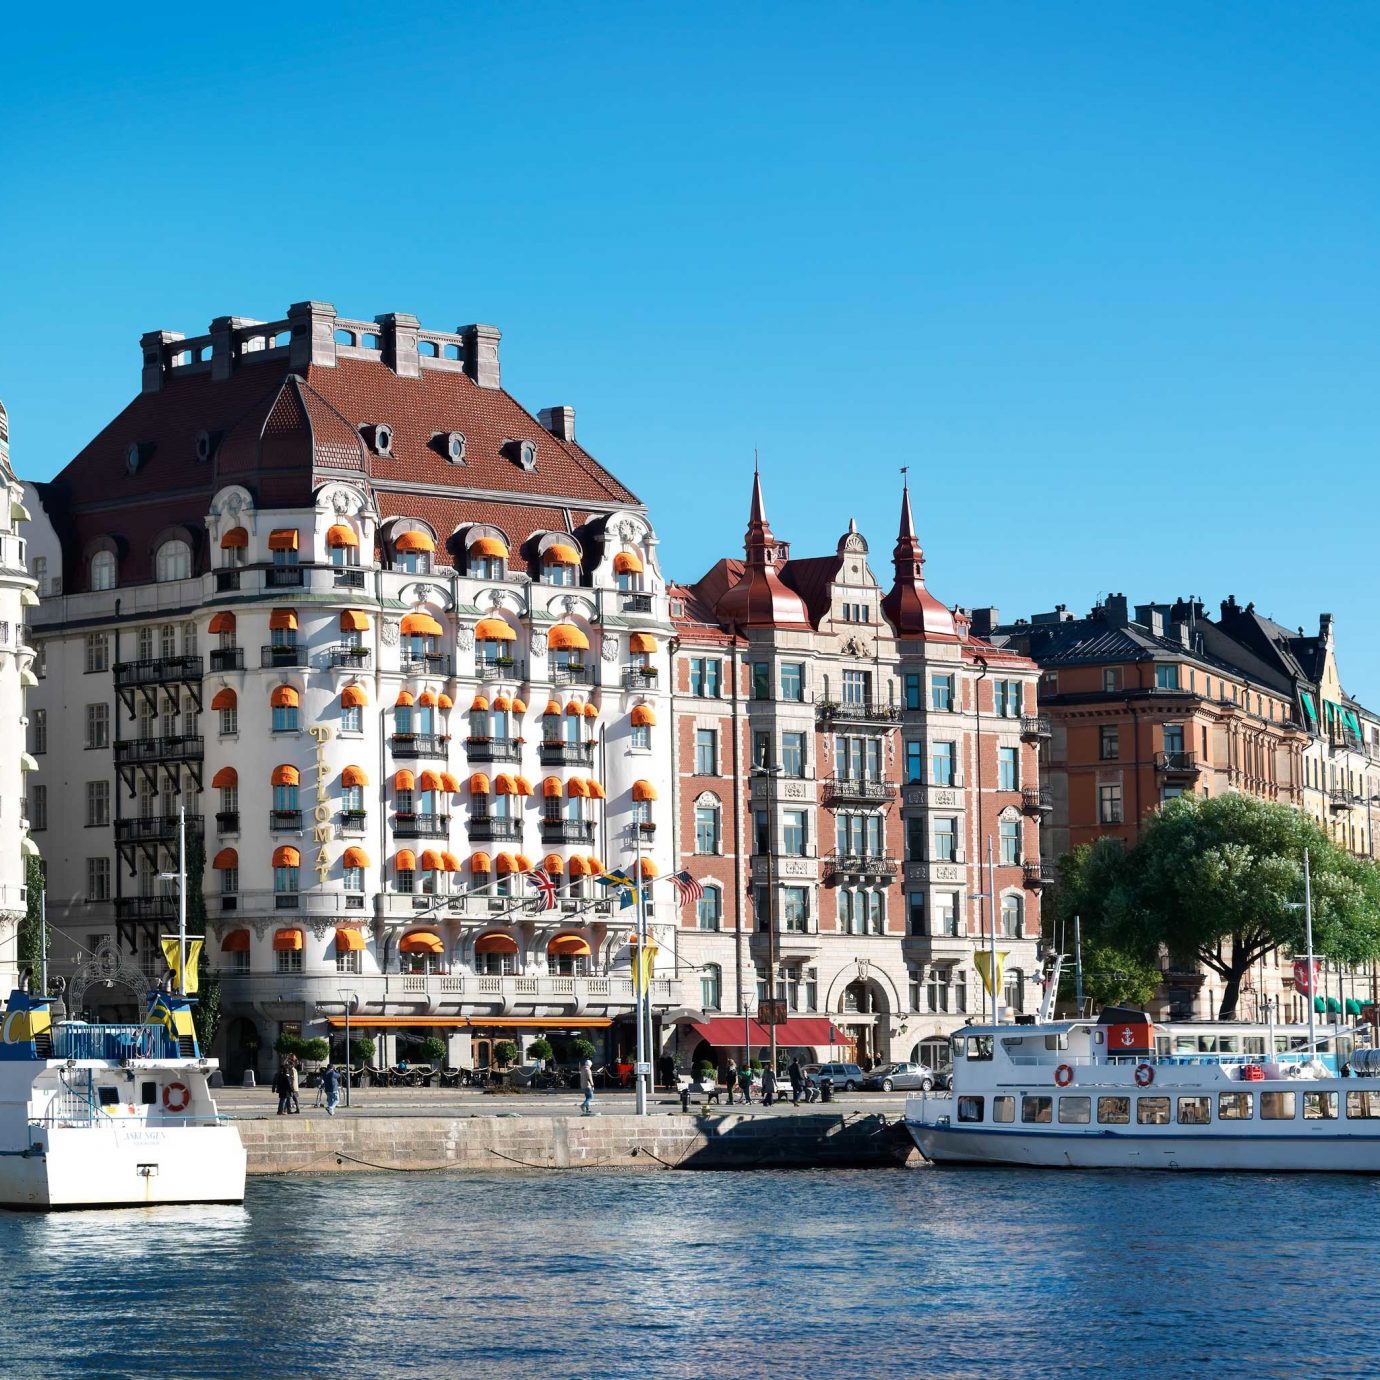 Elegant Exterior Hip Hotels Modern Stockholm Sweden water outdoor sky Boat building landmark Town Harbor City scene waterway cityscape vehicle Canal tourism vacation River day